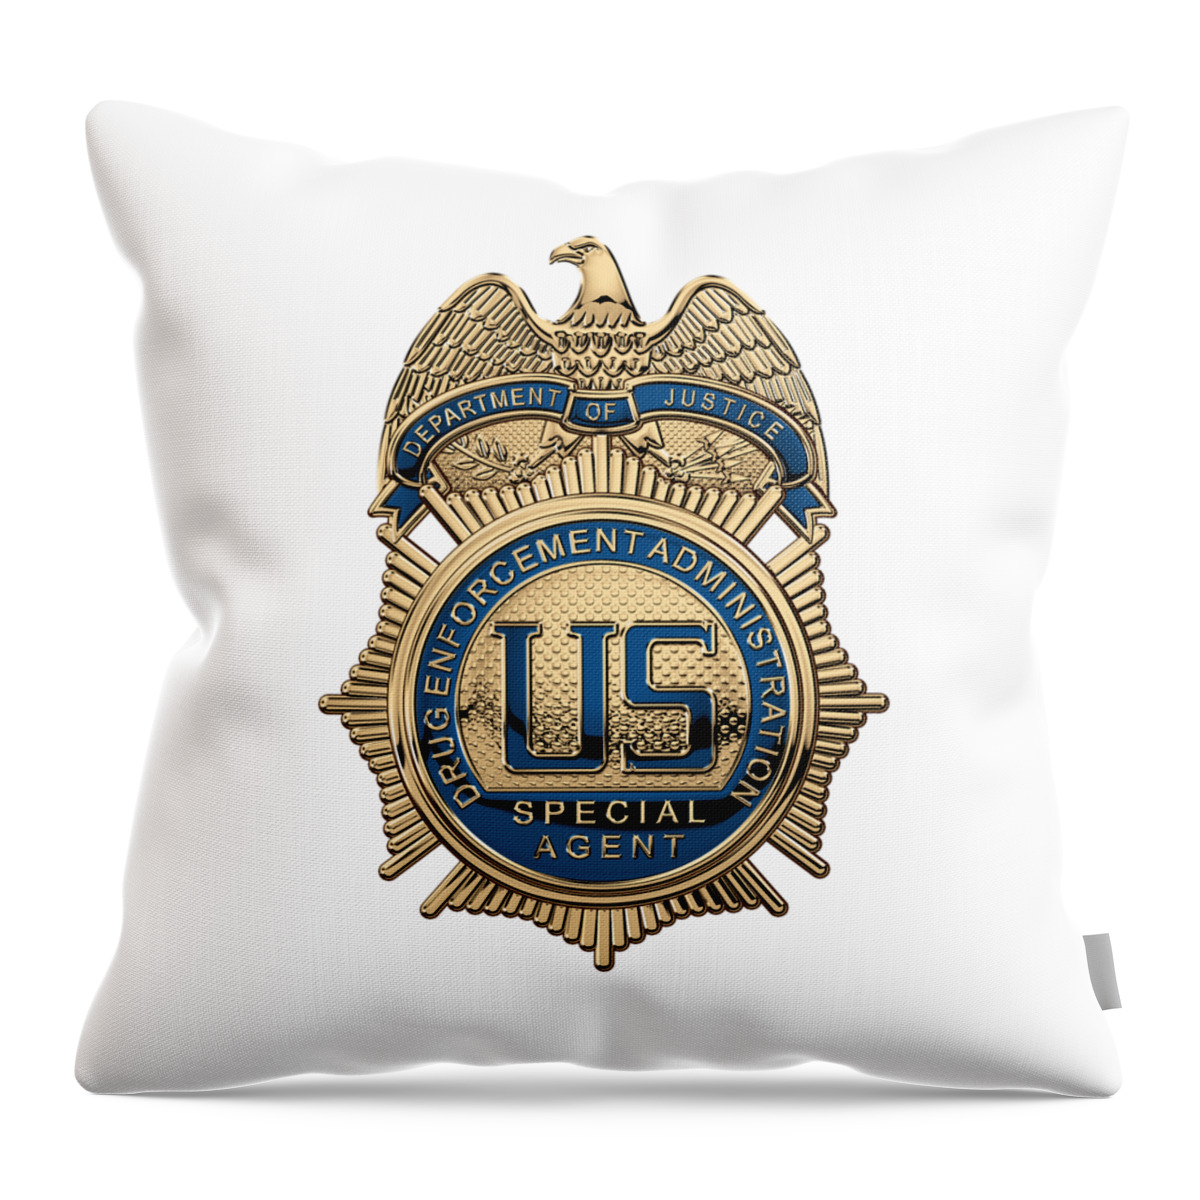  ‘law Enforcement Insignia & Heraldry’ Collection By Serge Averbukh Throw Pillow featuring the digital art Drug Enforcement Administration - D E A Special Agent Badge over White Leather by Serge Averbukh